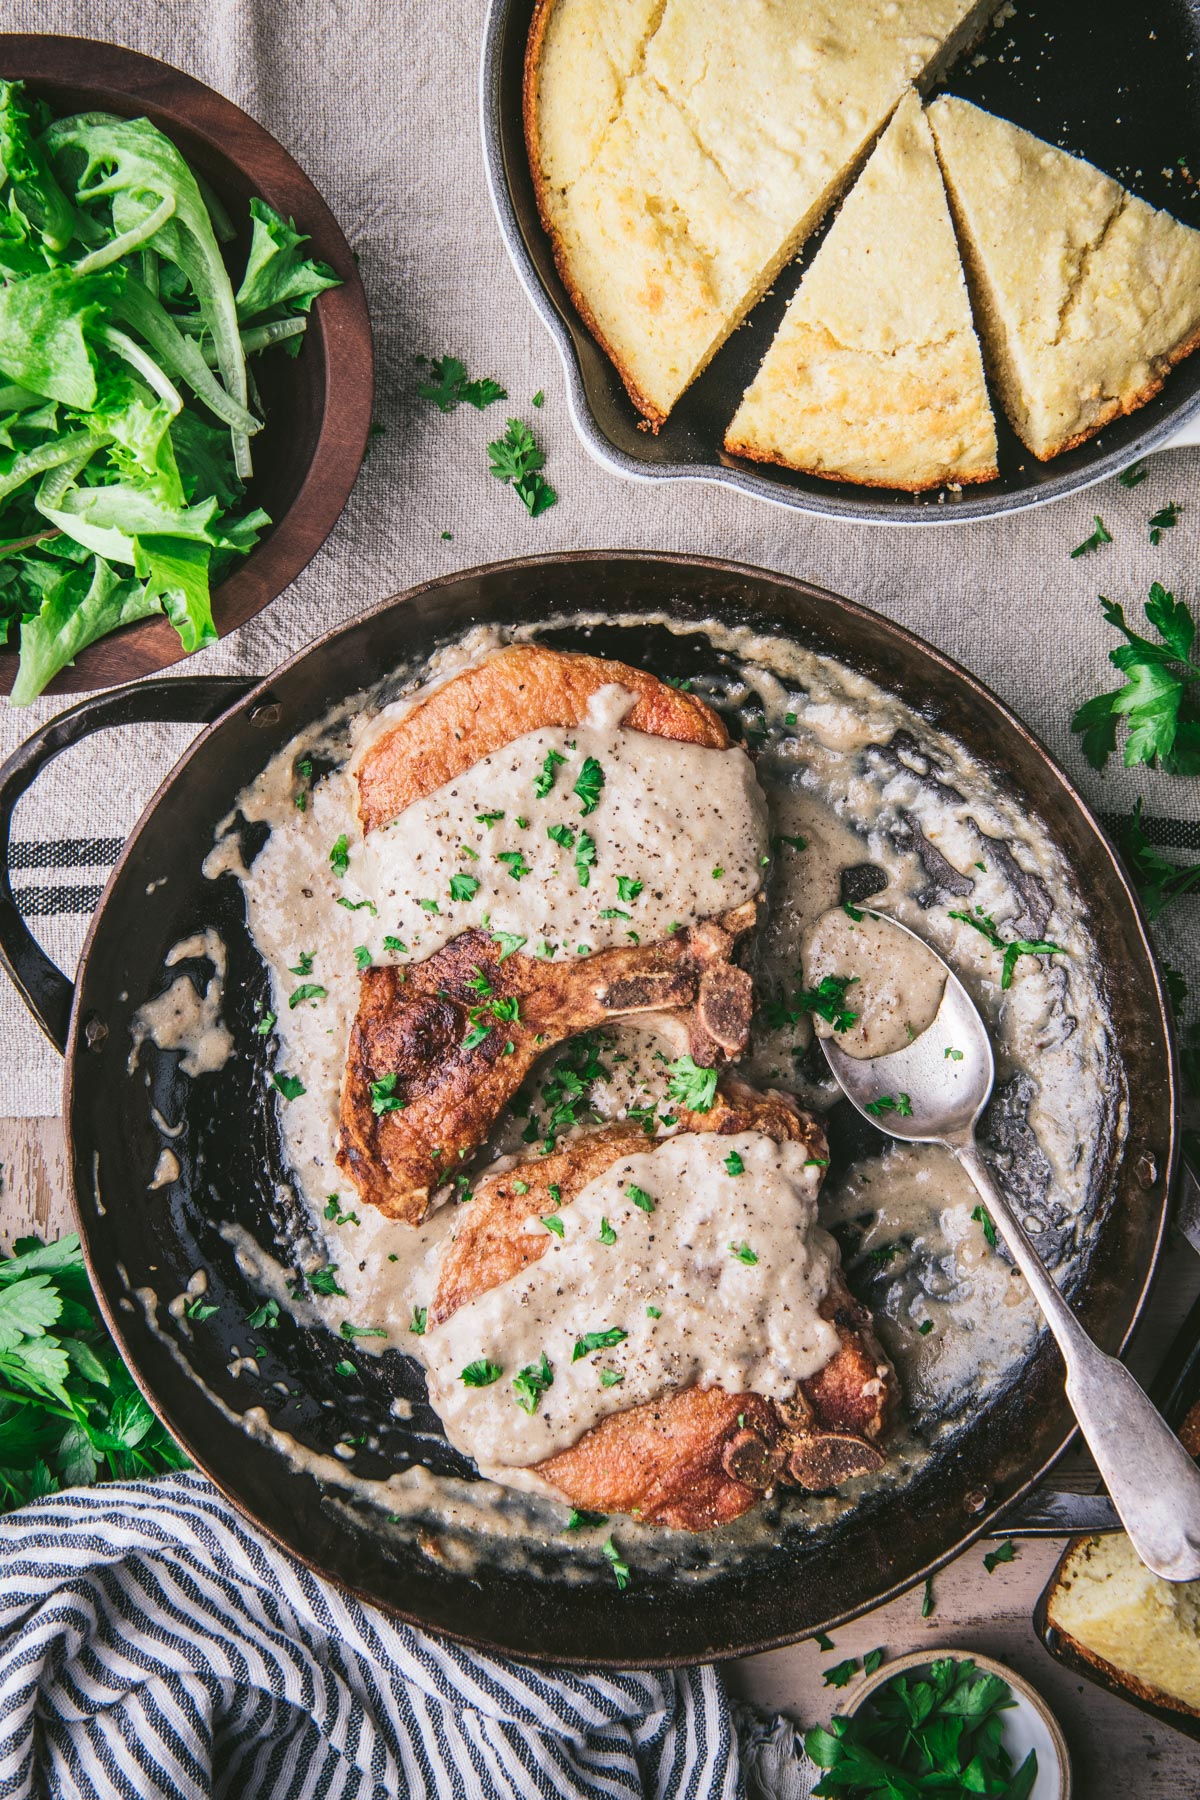 Pork chops and gravy in a cast iron skillet on a dinner table with a side of cornbread and salad